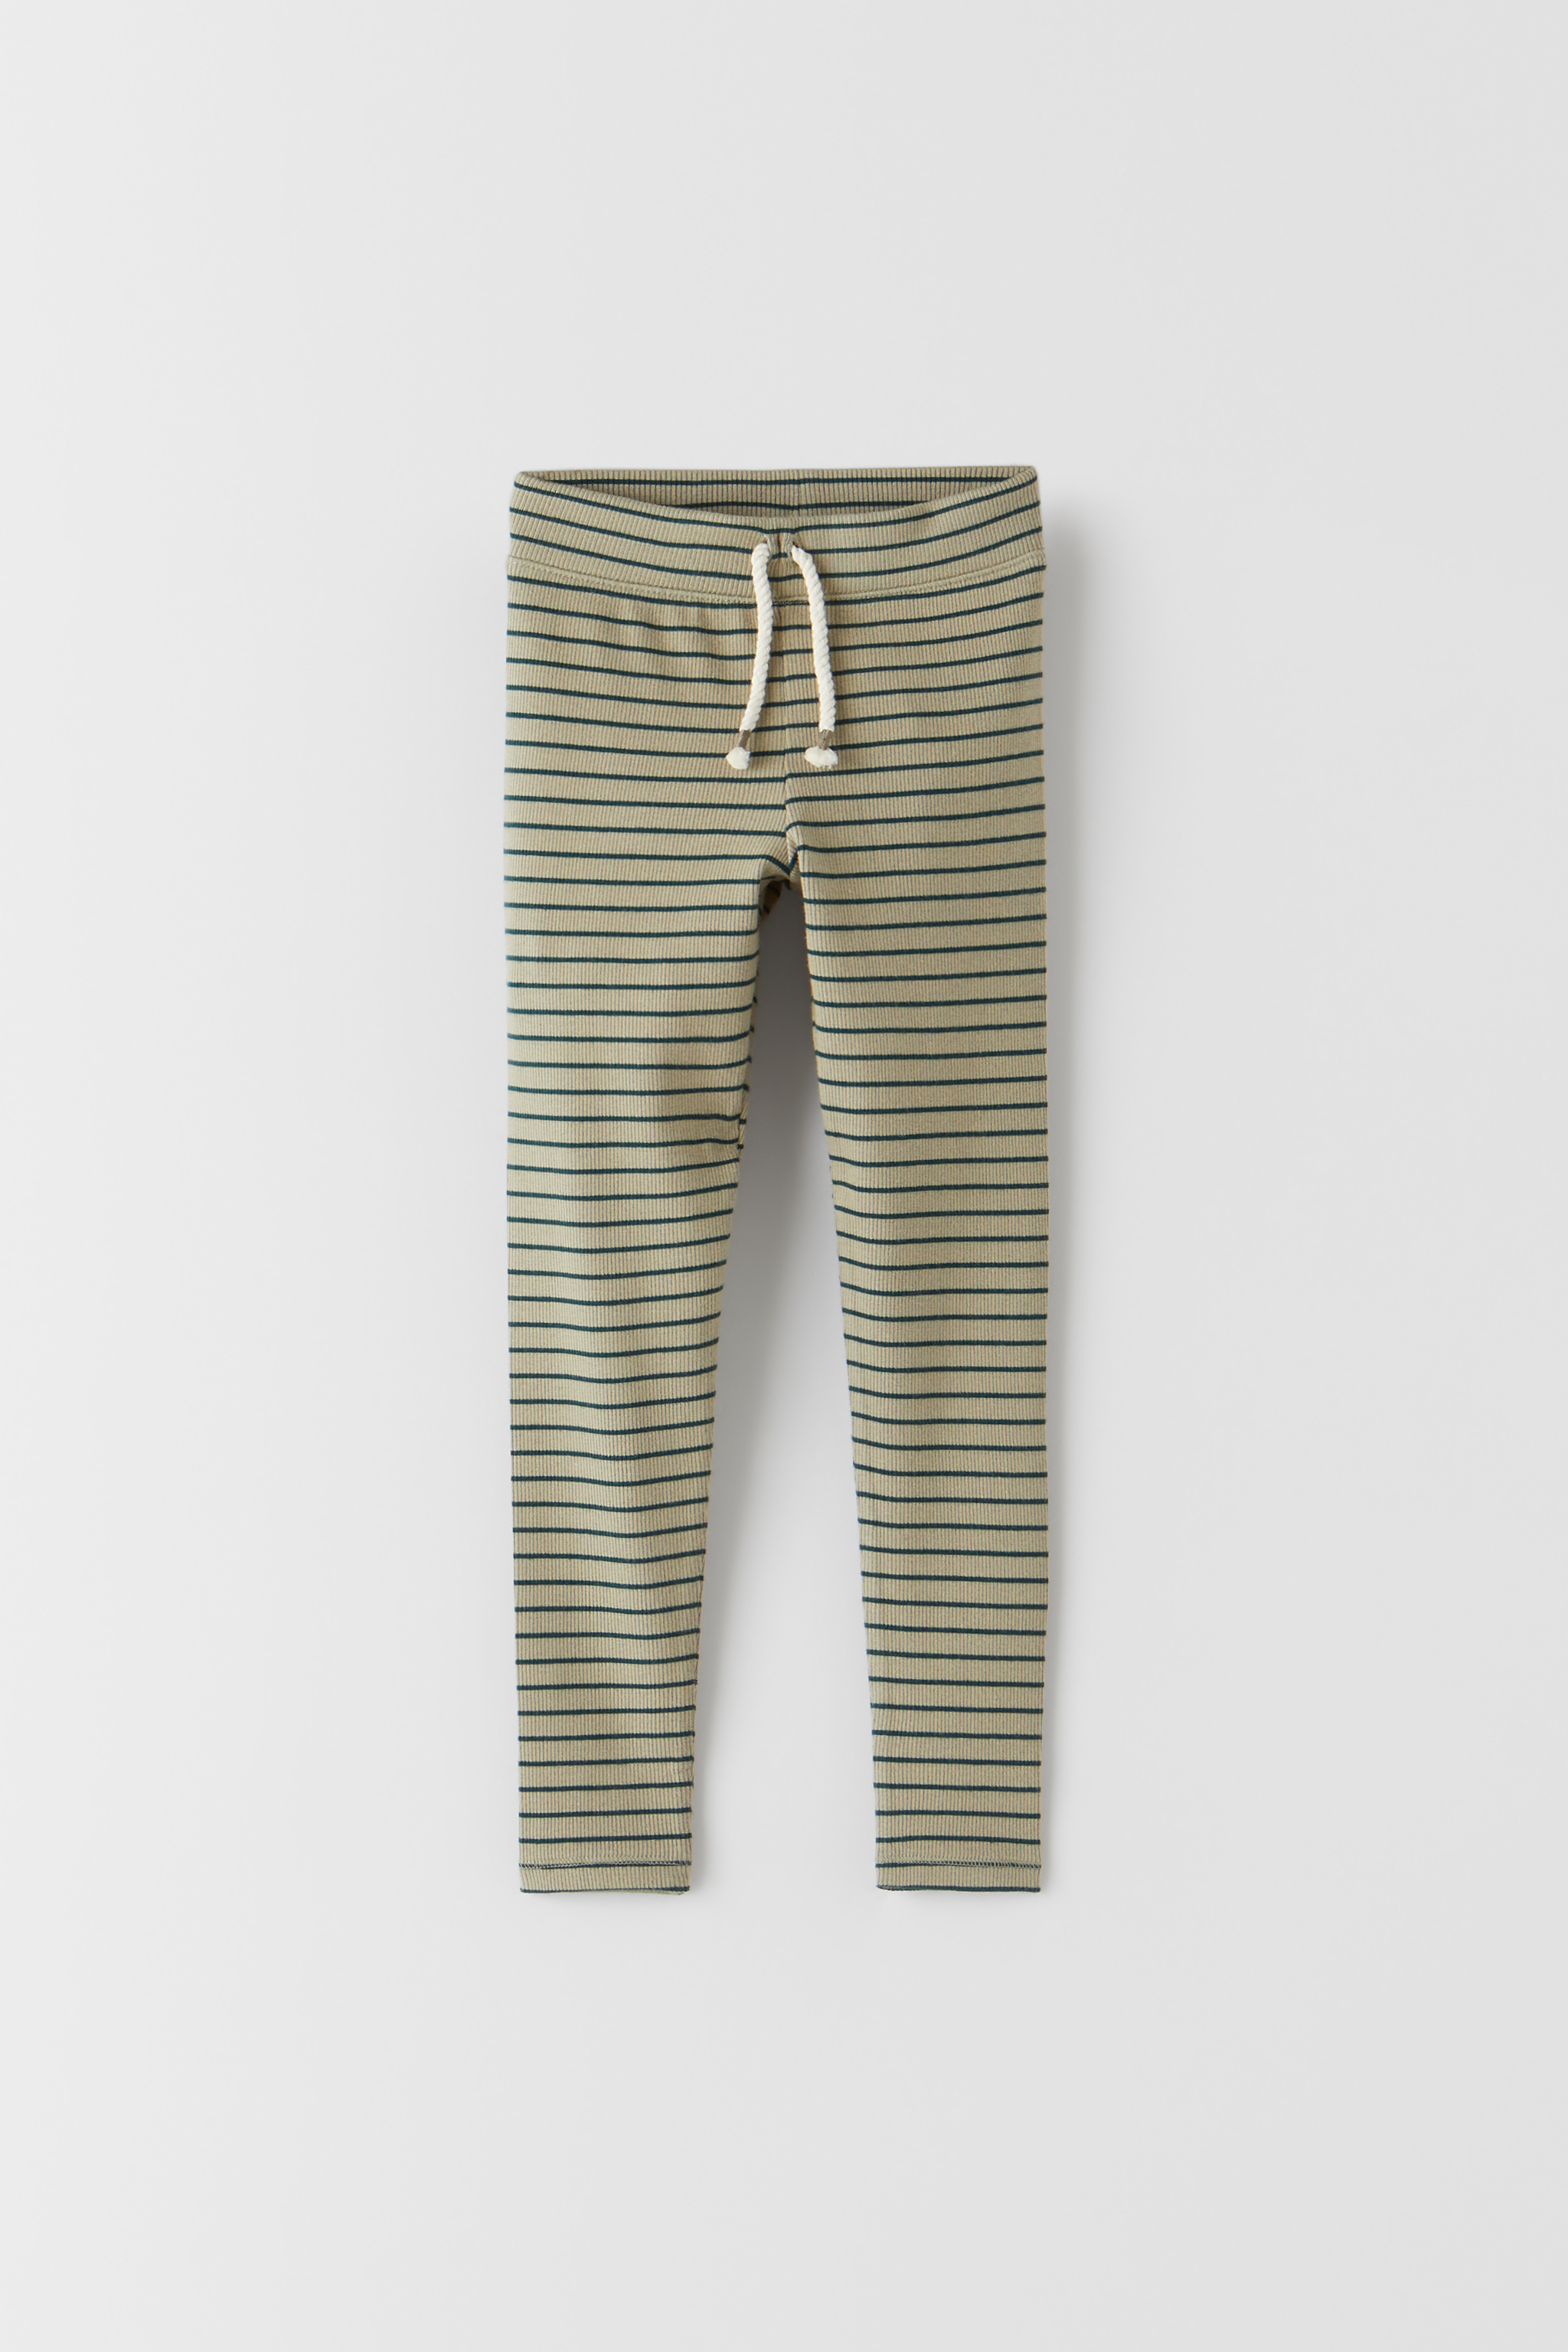 Zara Ribbed Leggings Co Ord  International Society of Precision Agriculture